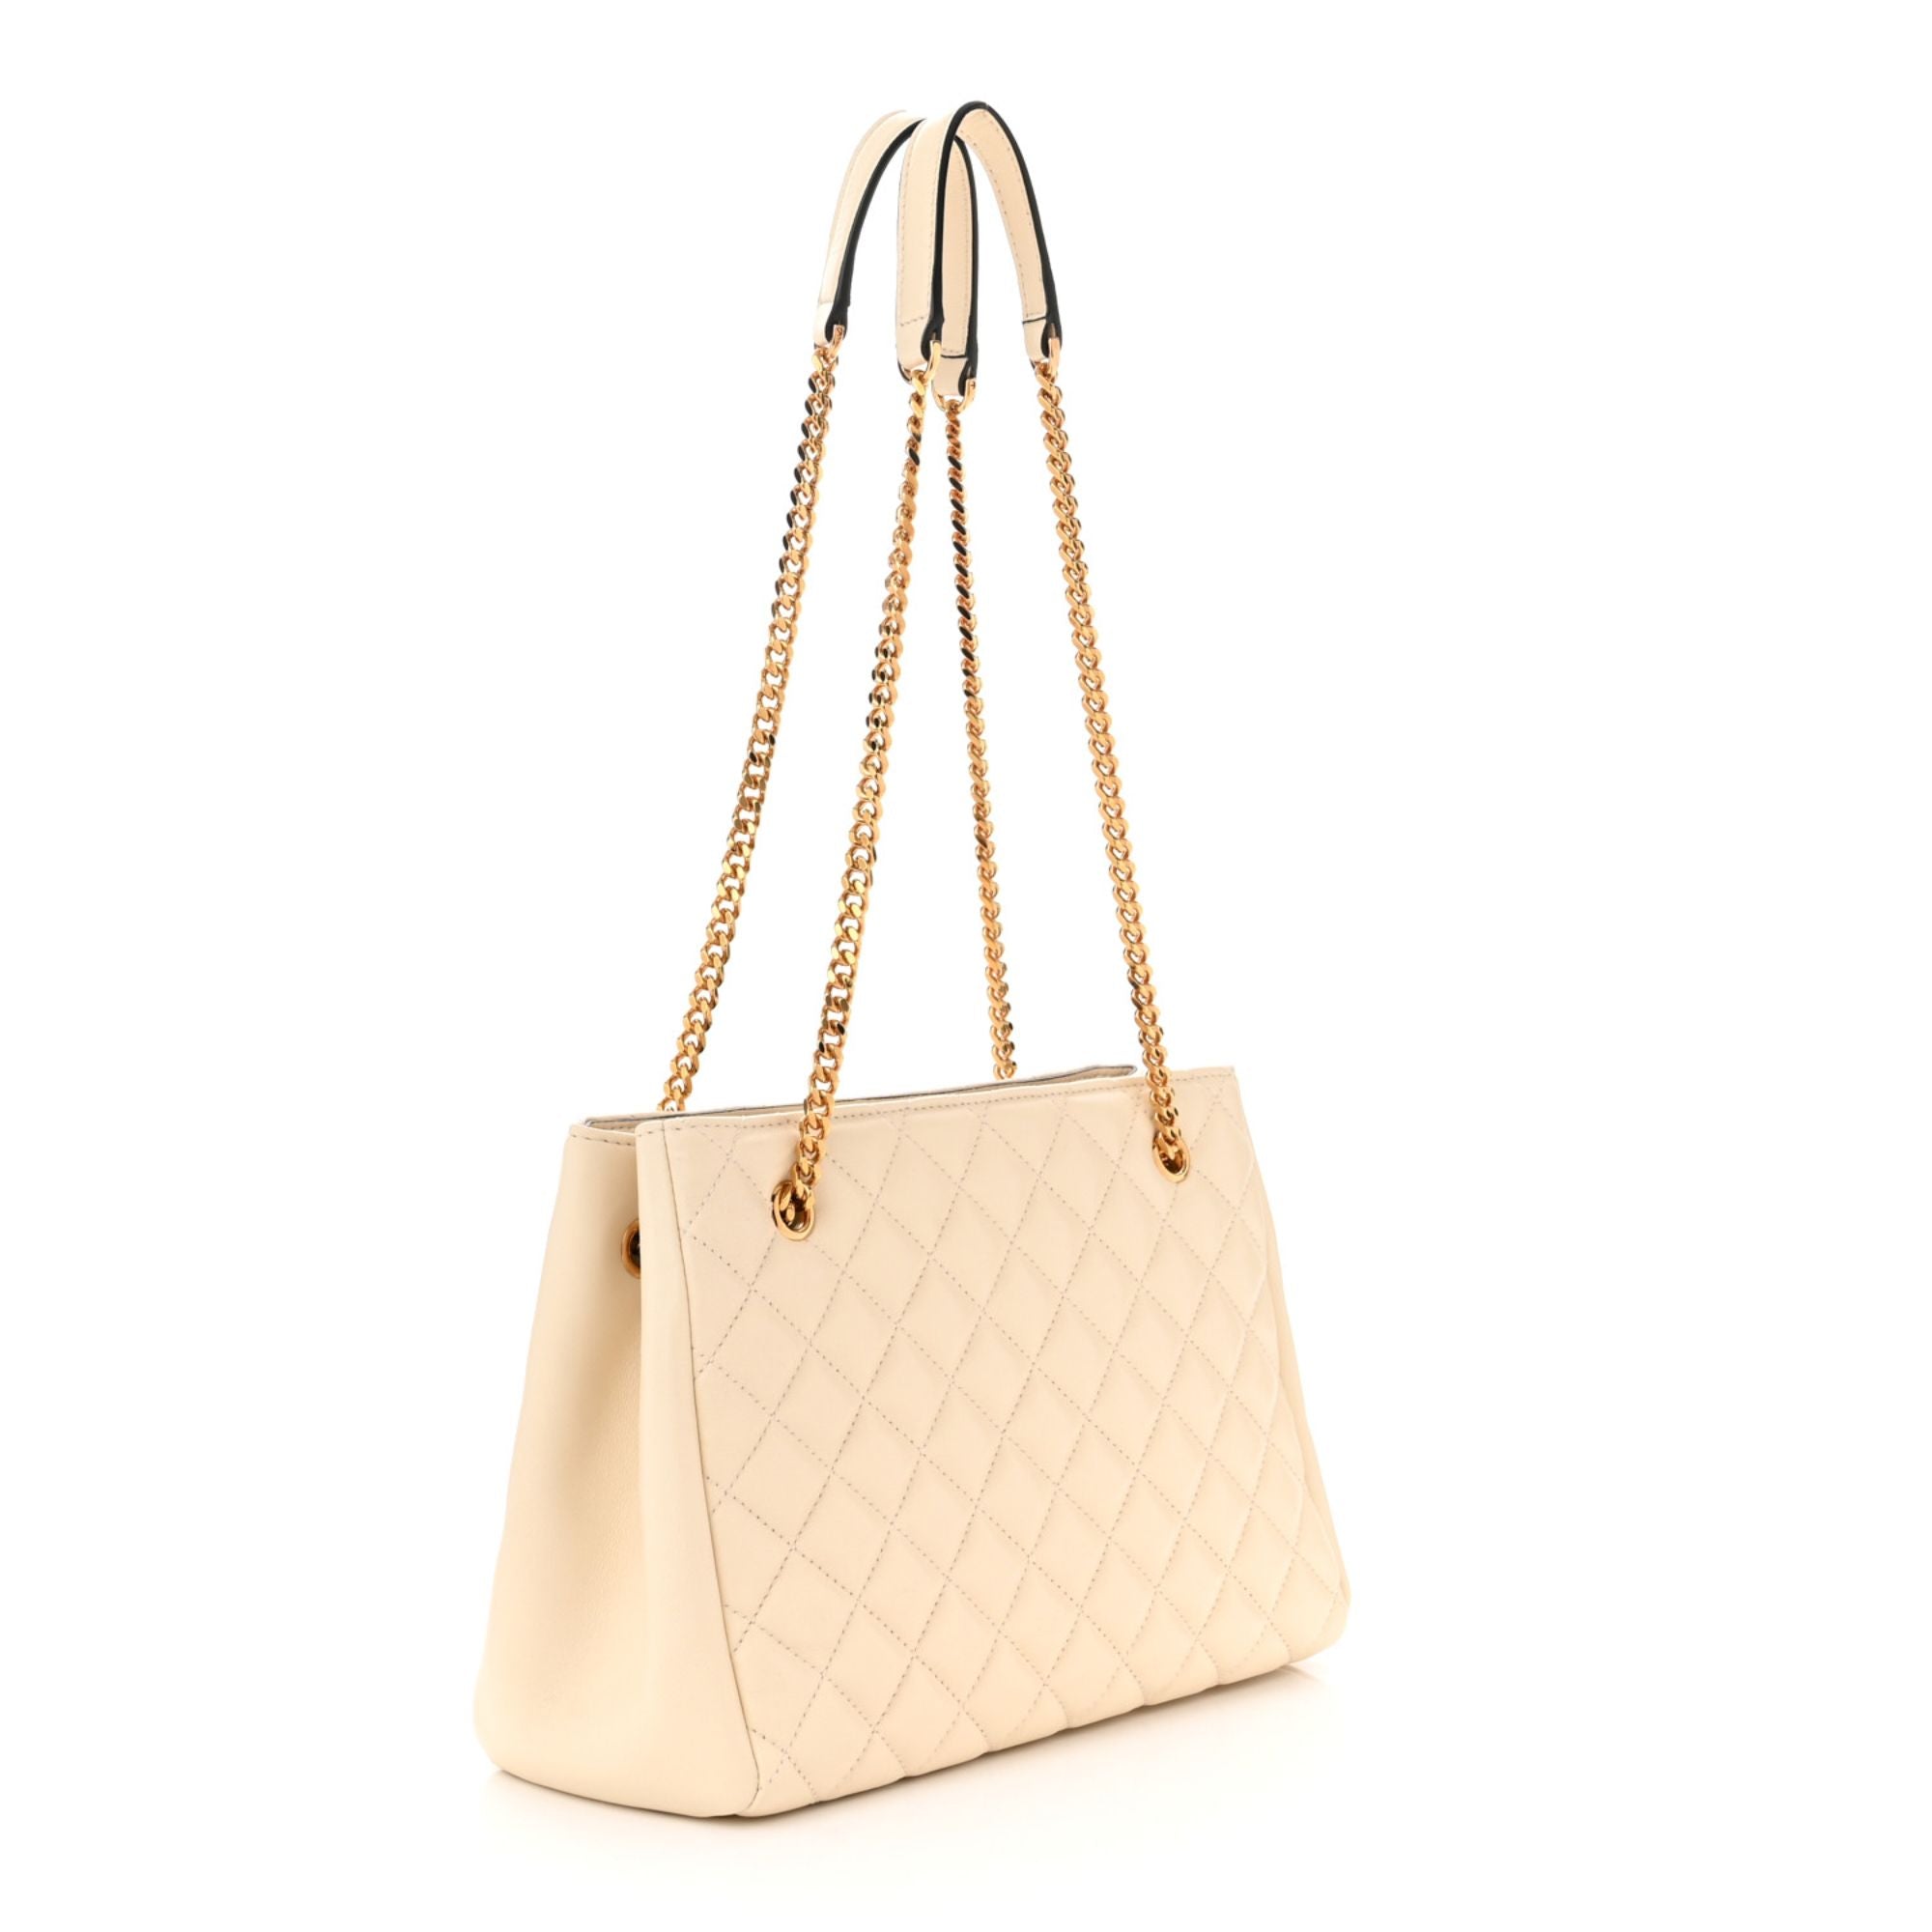 Versace La Medusa Nappa Quilted Beige Leather Large Tote Bag